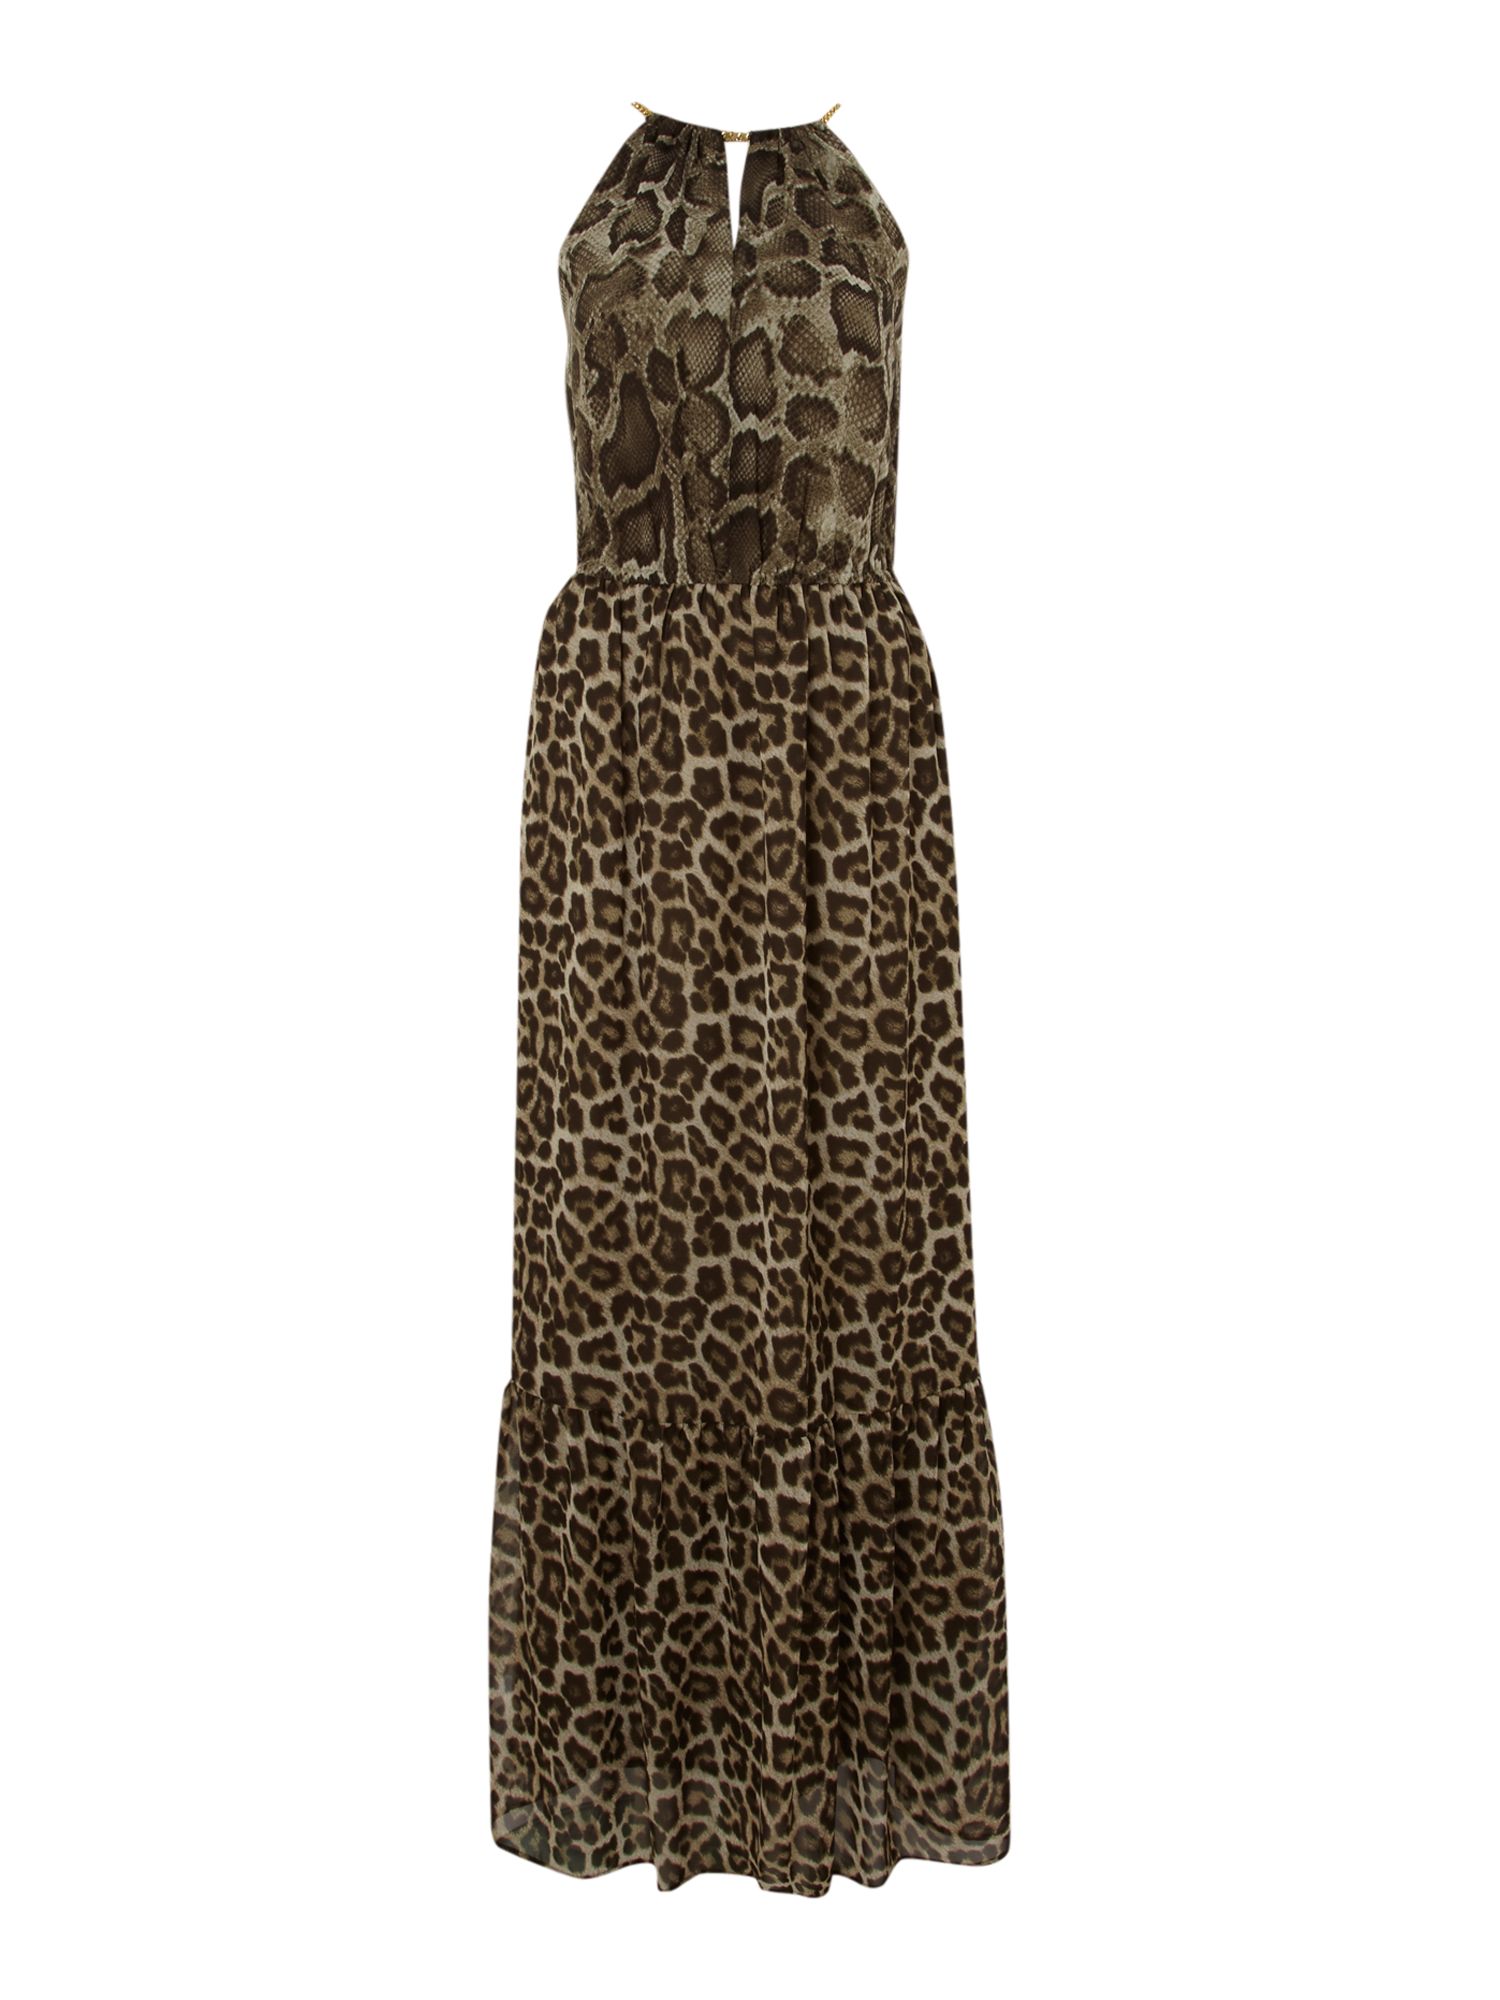 Michael Michael Kors Snake Print Maxi Dress with Chain Neck Detail in ...